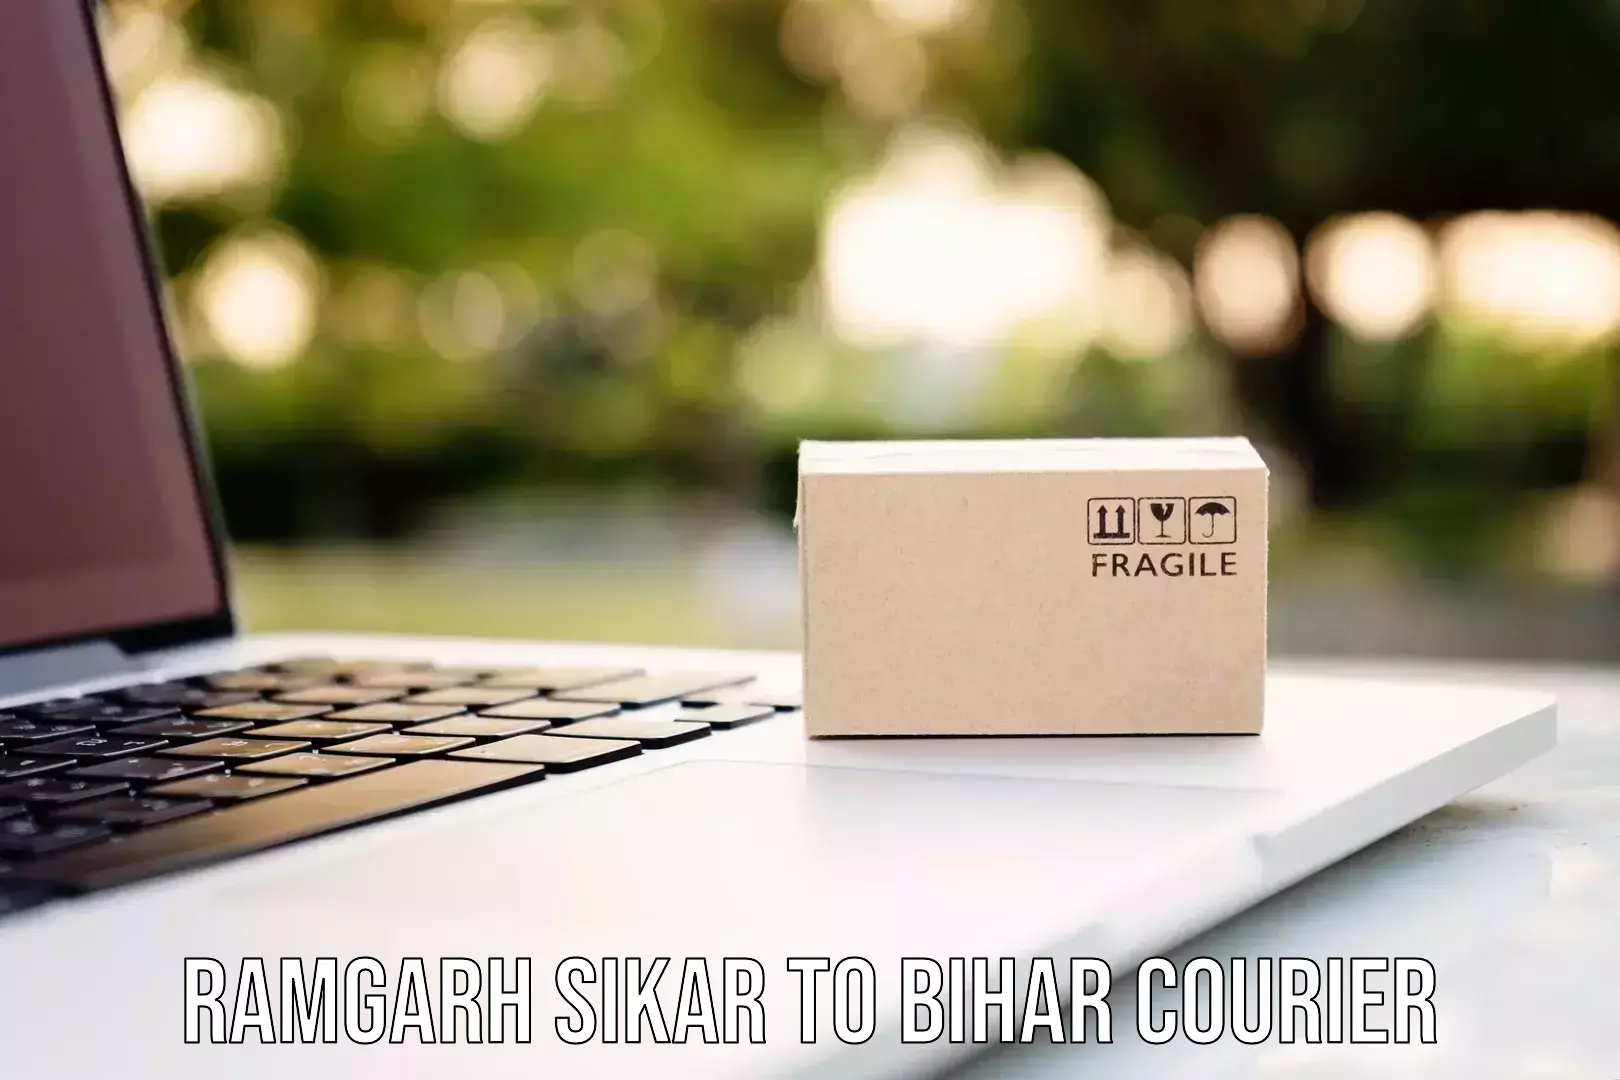 Online courier booking Ramgarh Sikar to Baniapur